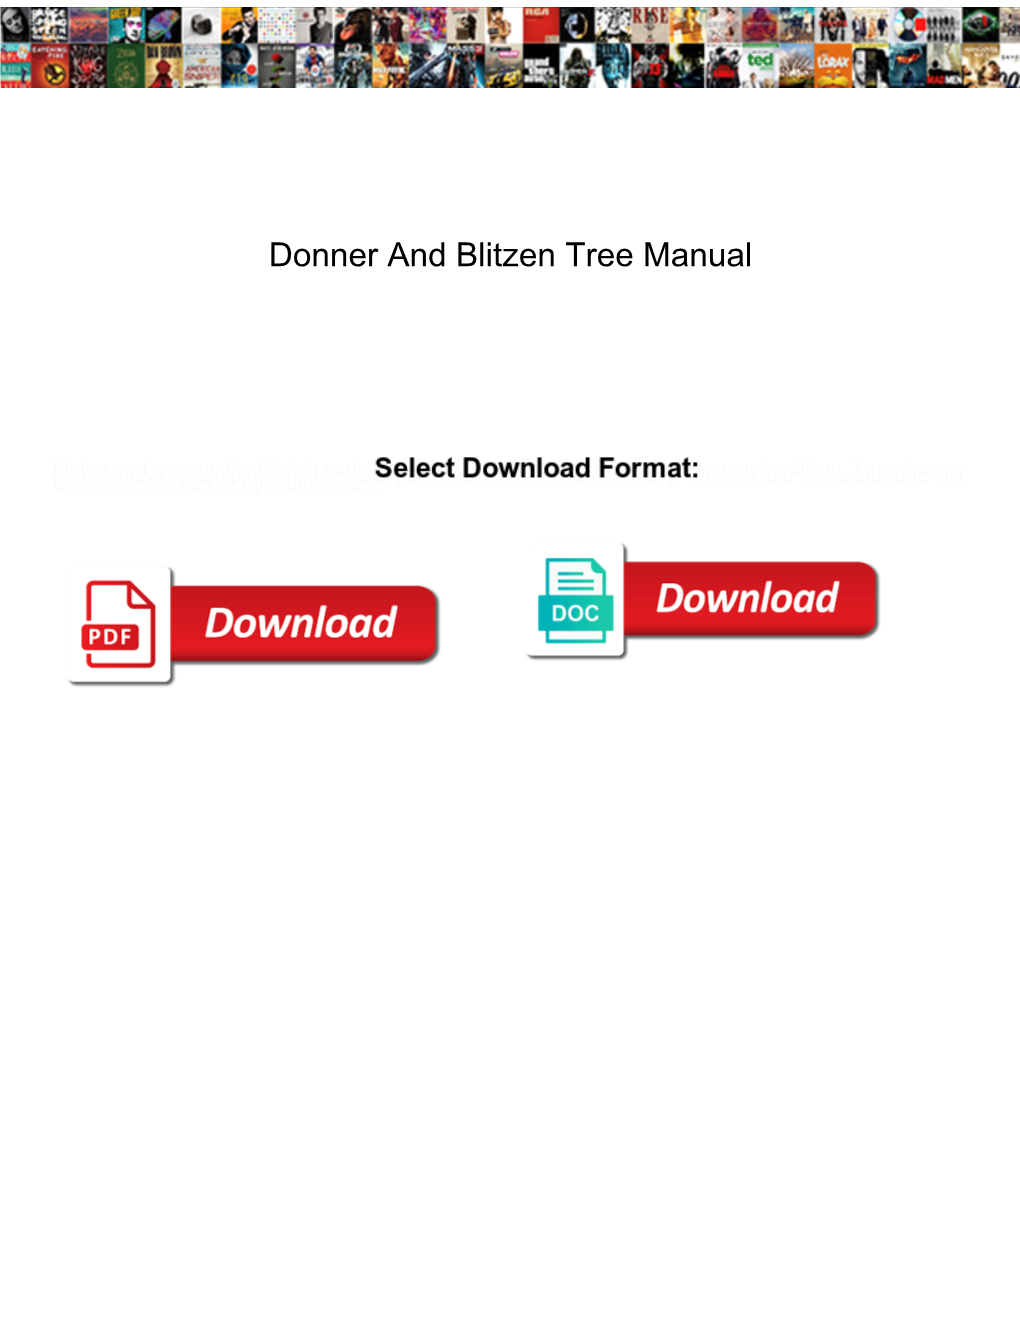 Donner and Blitzen Tree Manual